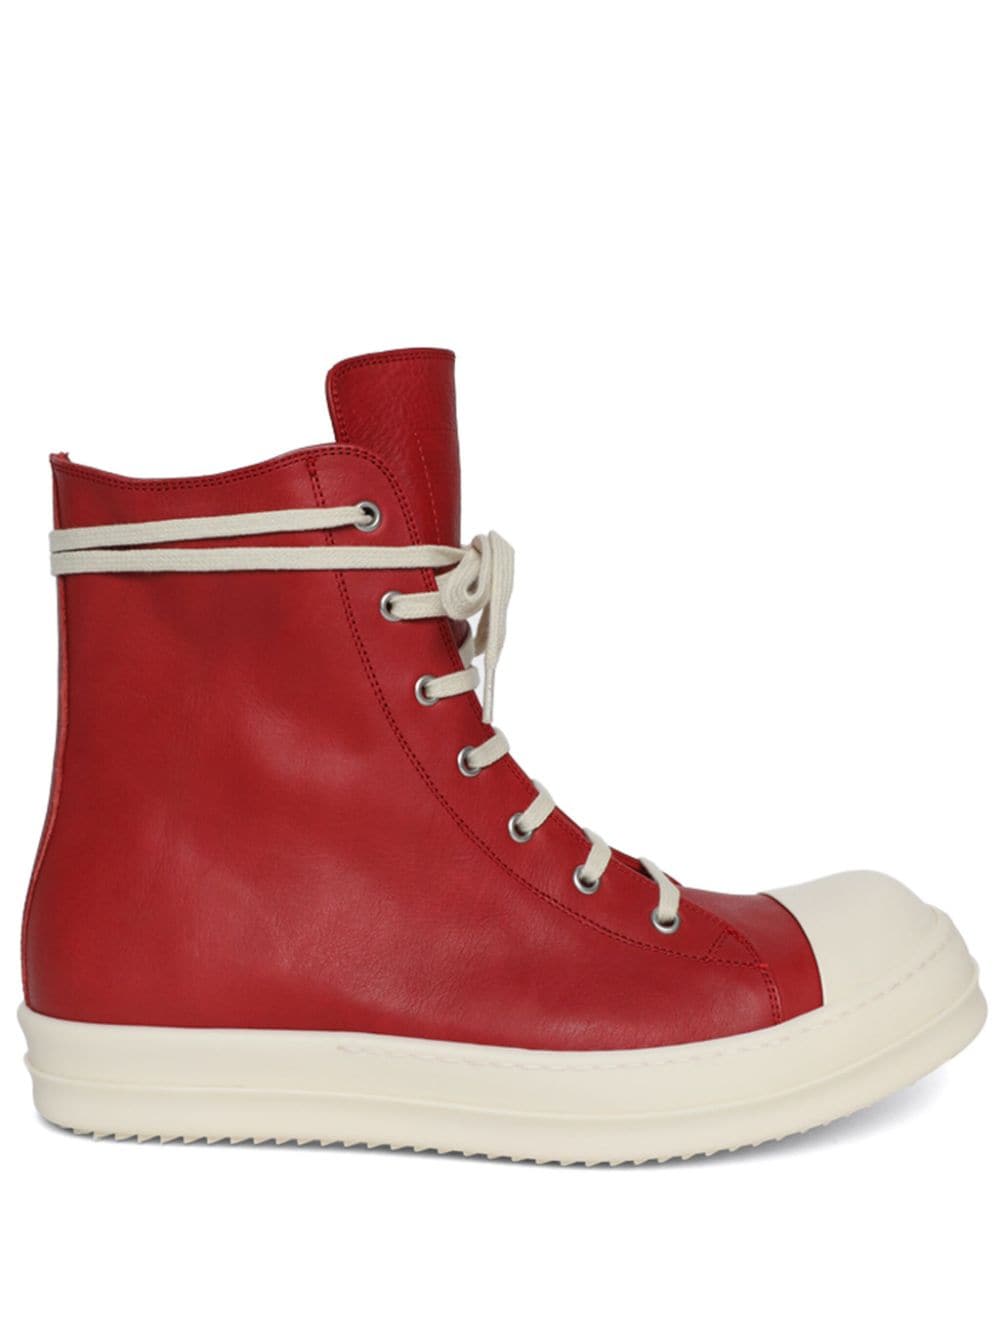 Rick Owens Lido High-top Sneakers In Red